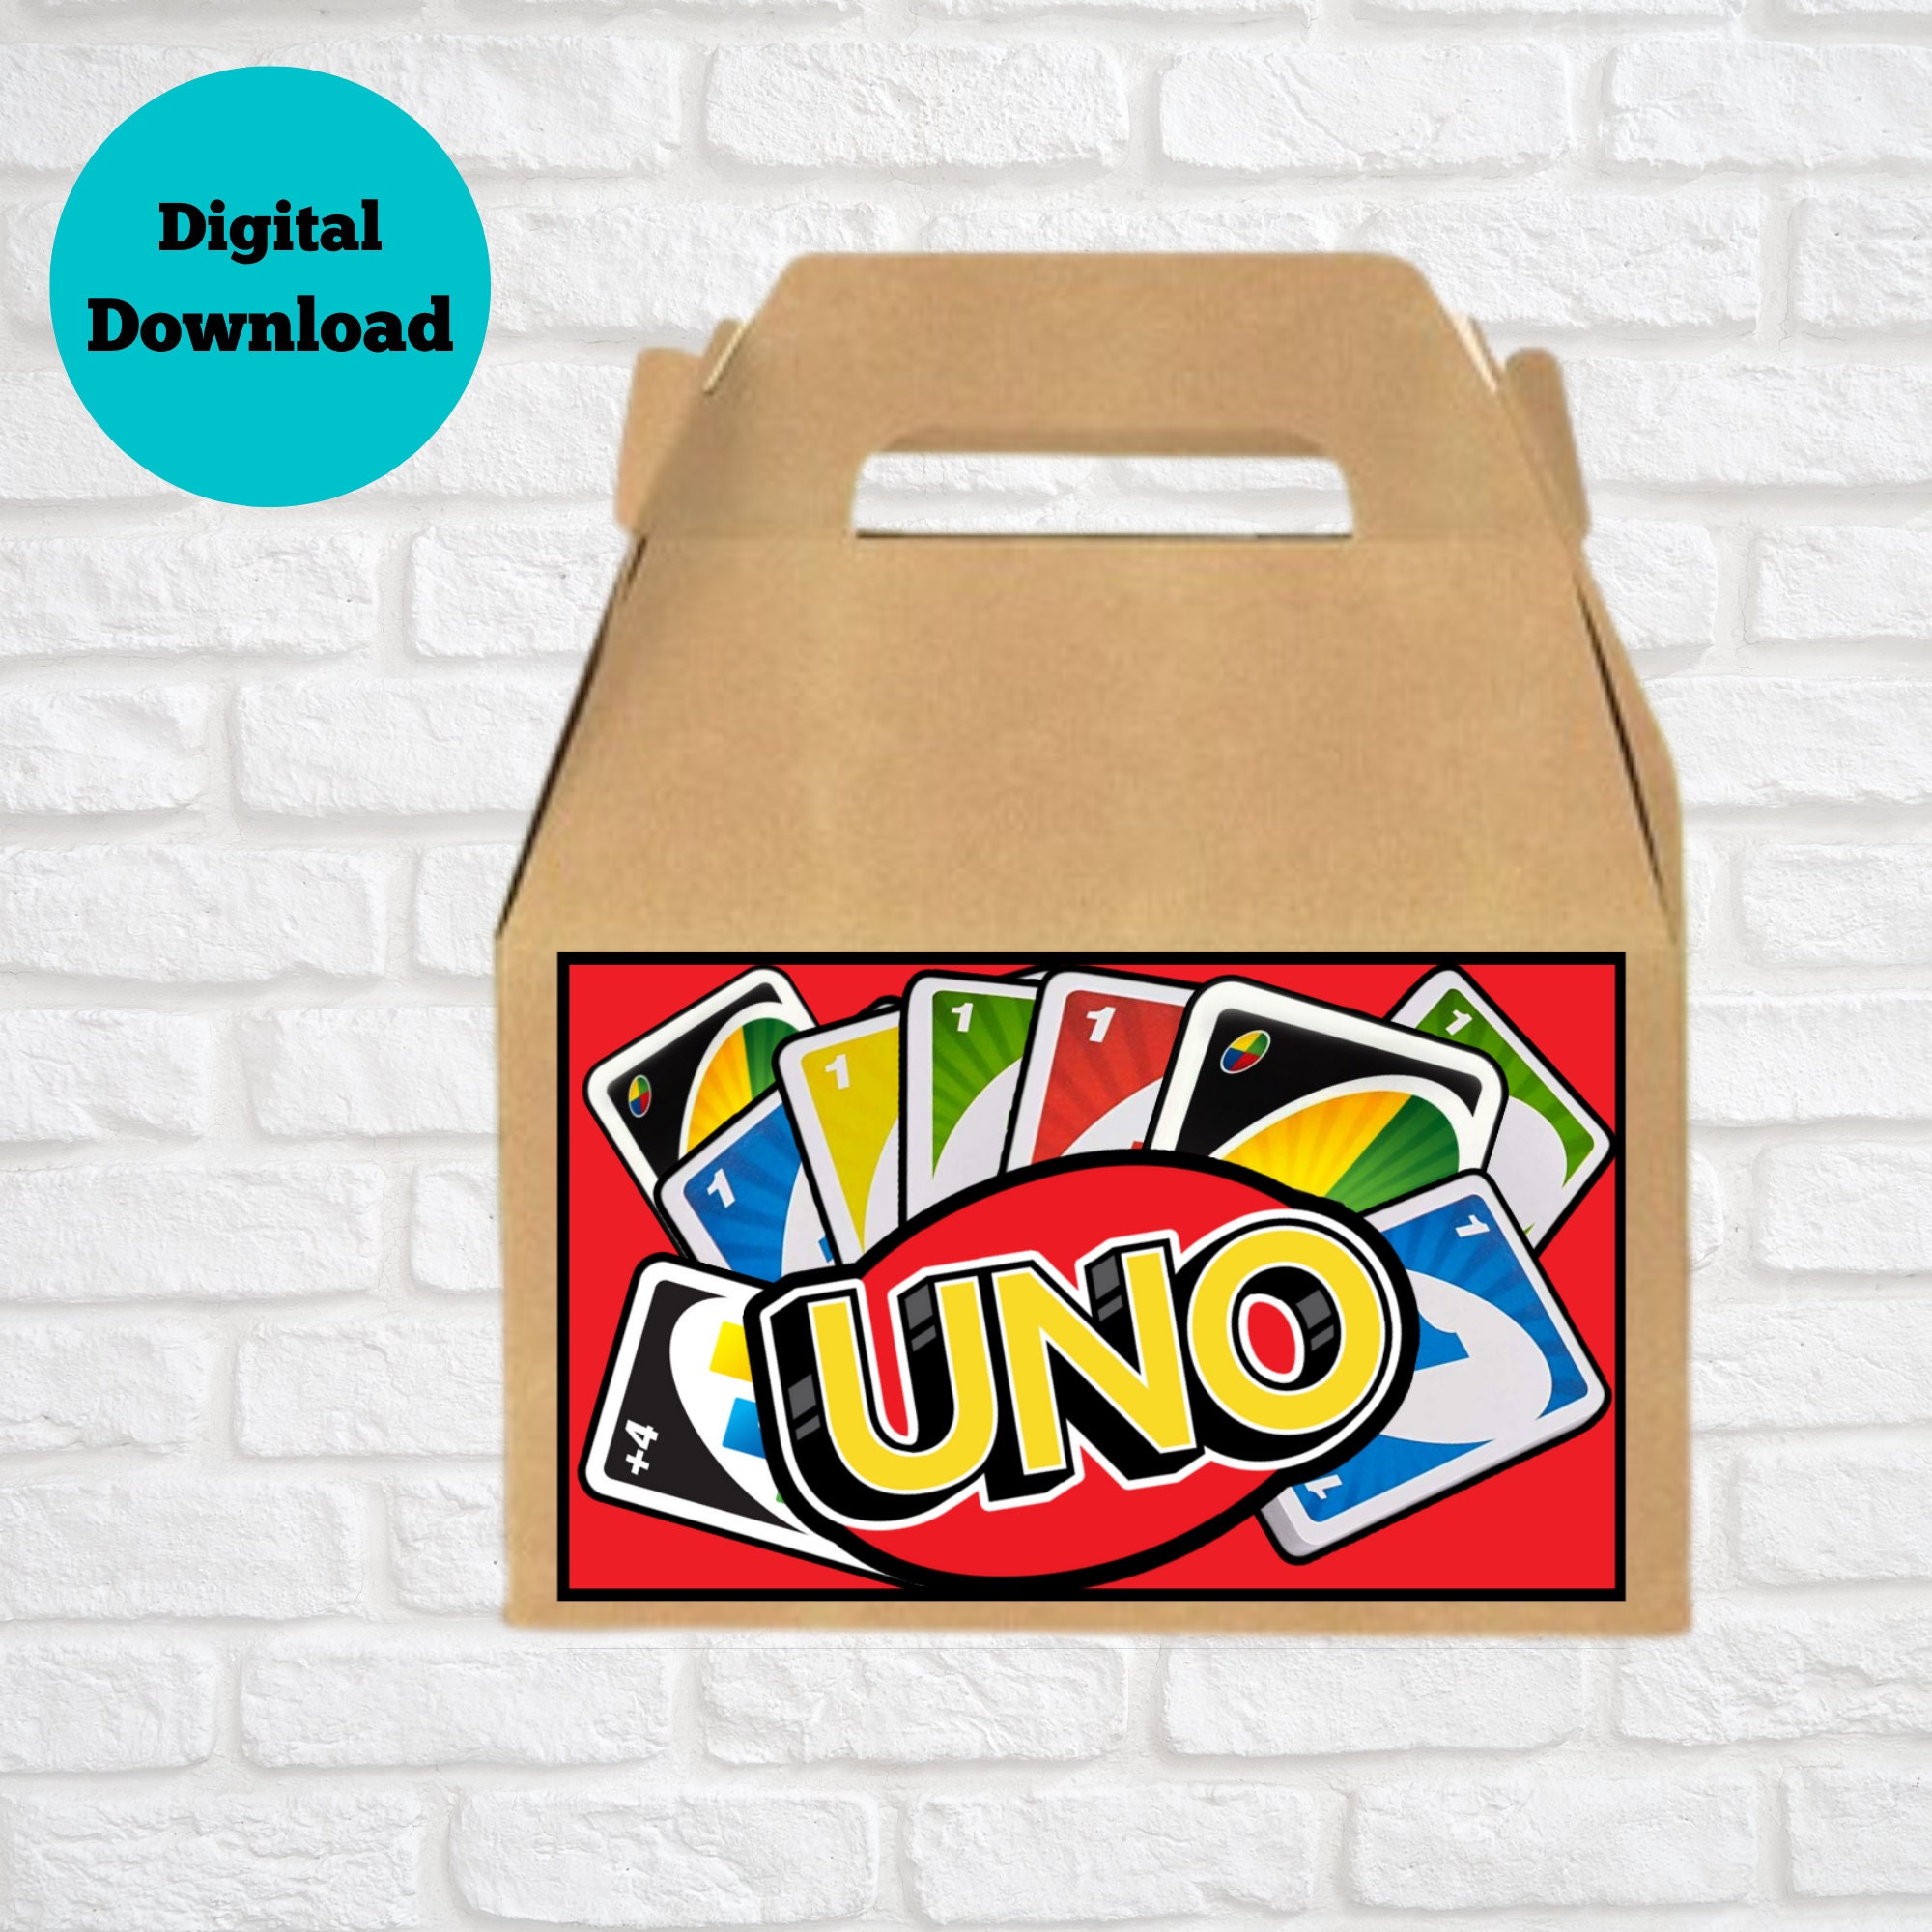 UNO Super Mario Card Game Gift for Kids New Cameroon